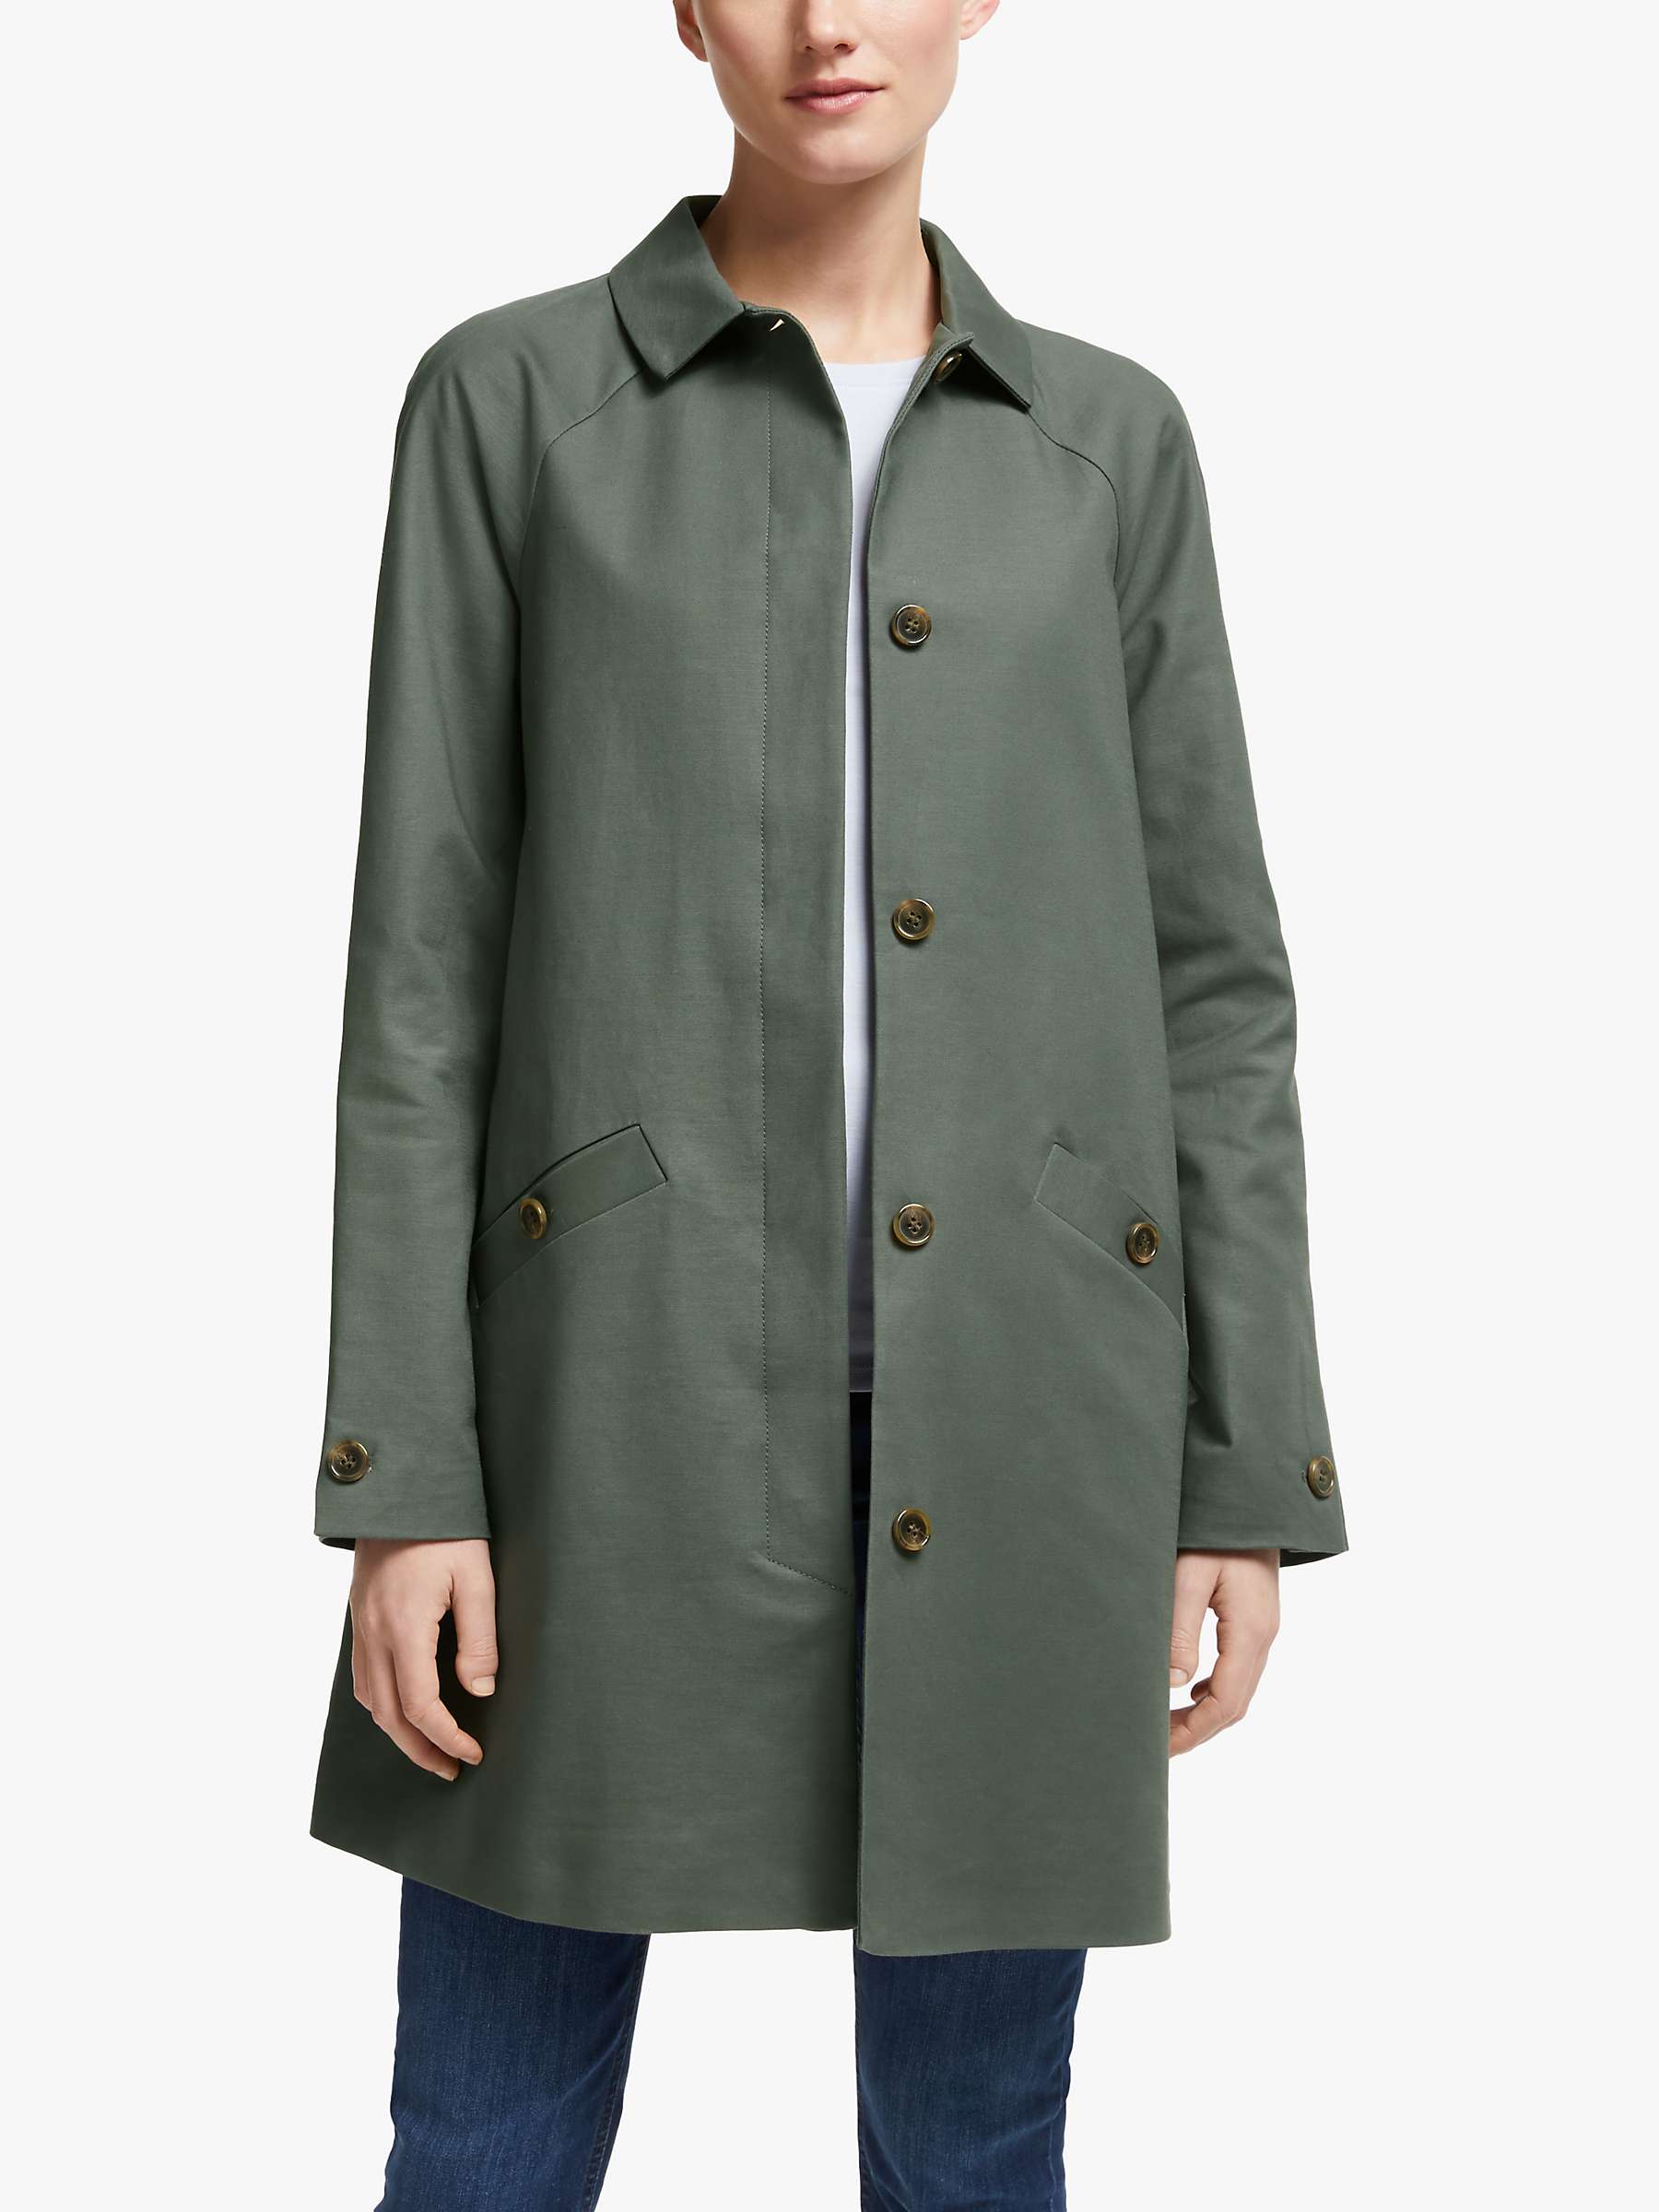 5 of the best Classic Mac Coats for 2020 â JacquardFlower